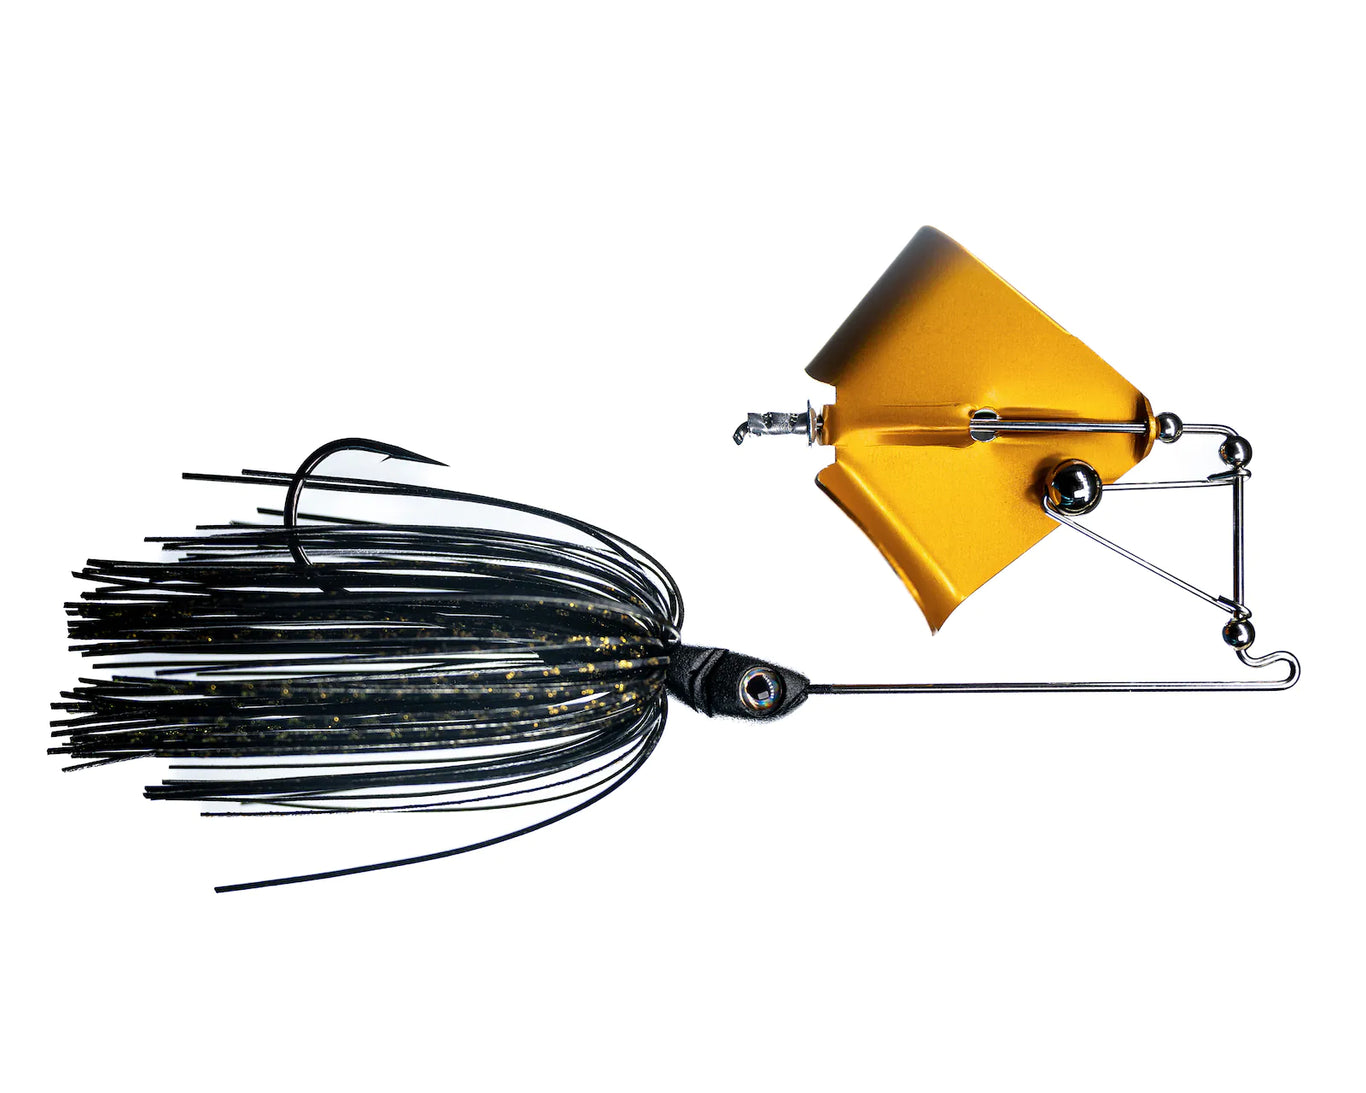 Buy black-and-gold BIZZ BAITS DINNER BELL BUZZ BAIT